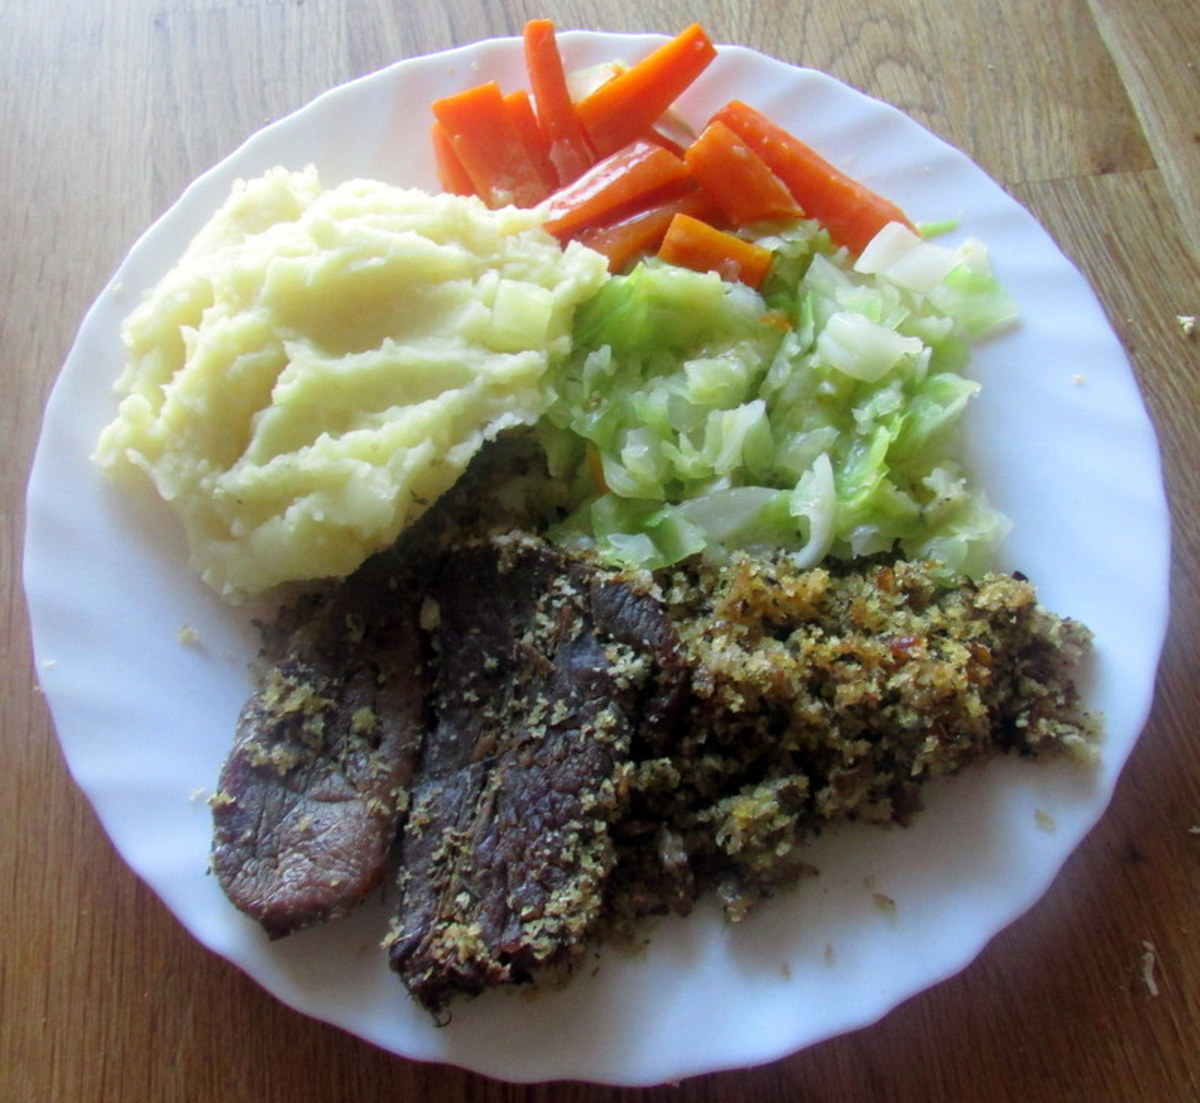 Lamb steaks with mashed potatoes and vegetables